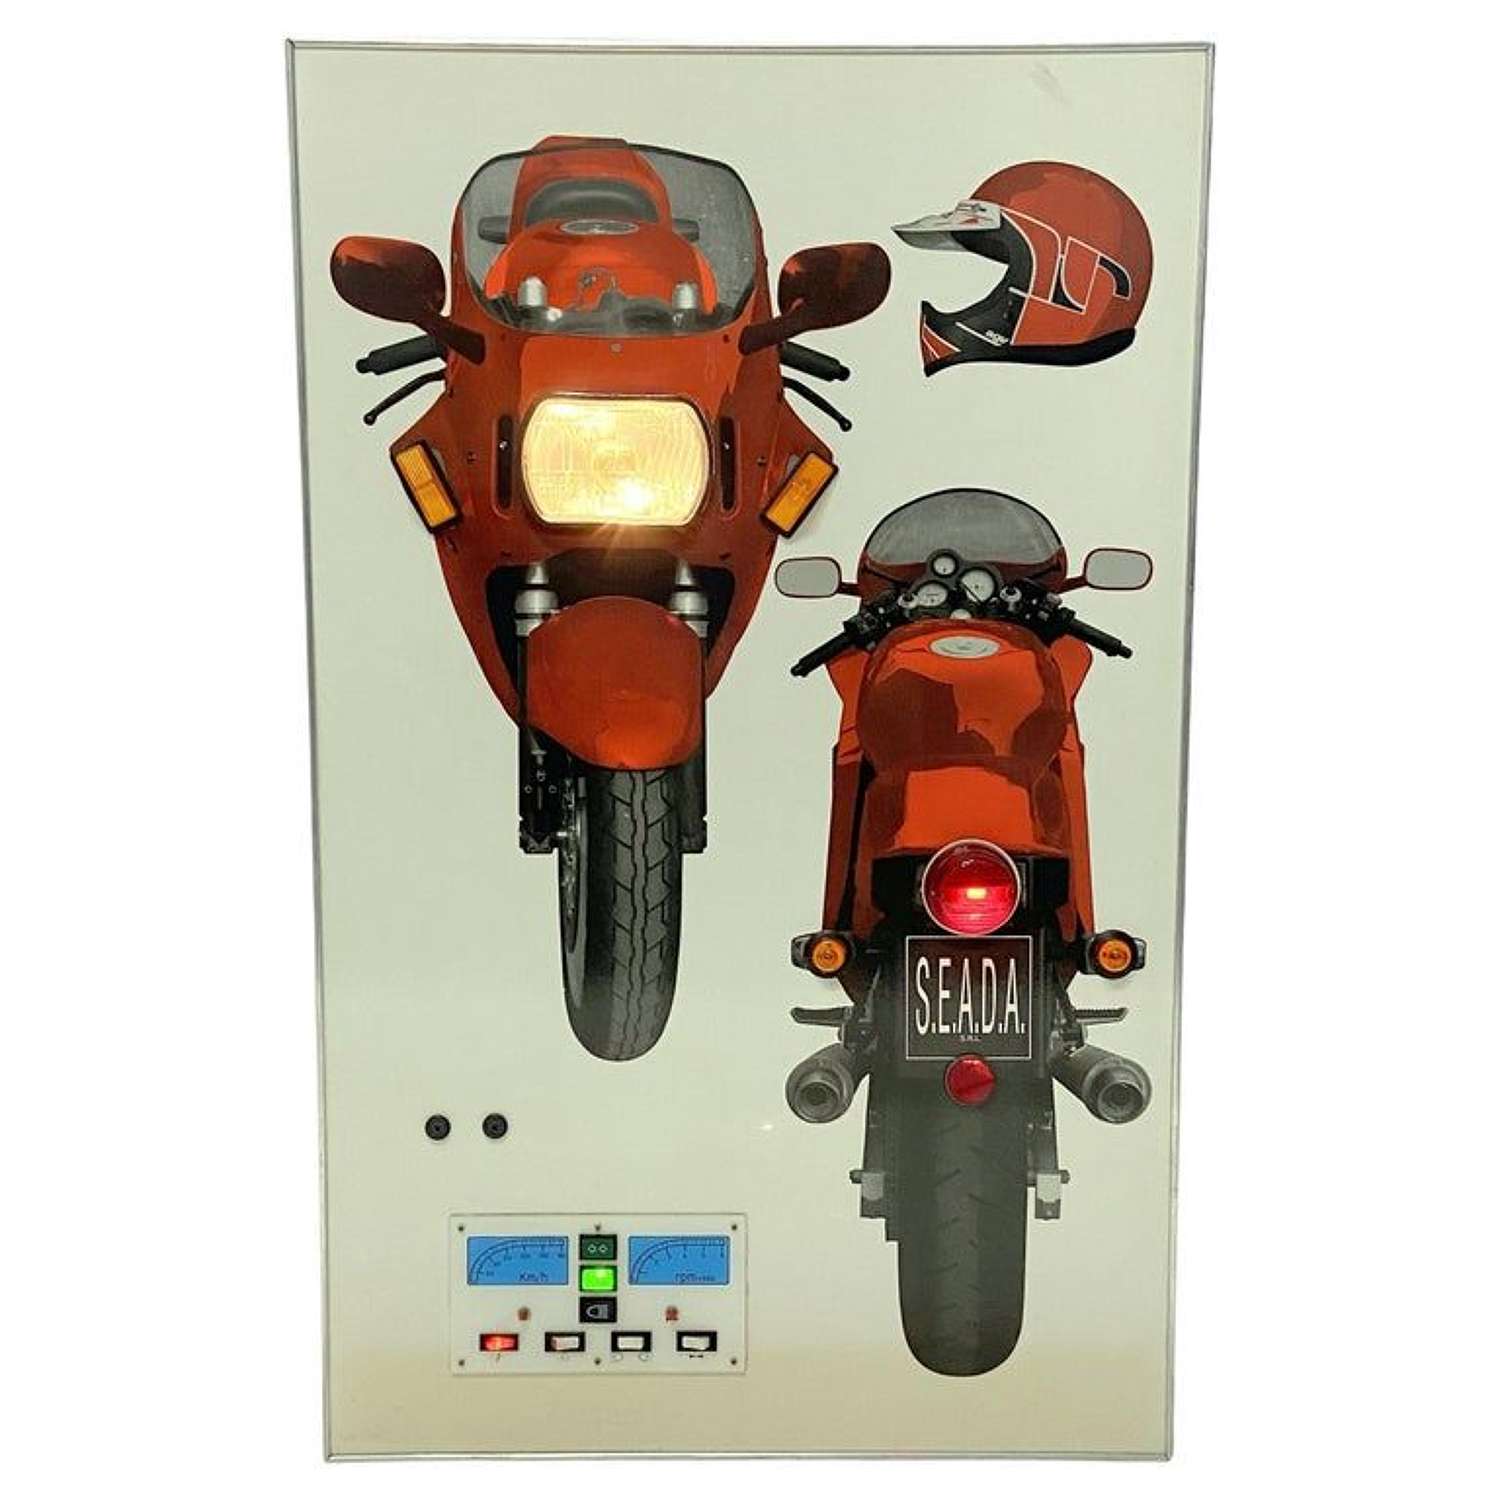 Wall Mounted Artwork with Motorbike Demonstrating Lights for Driving